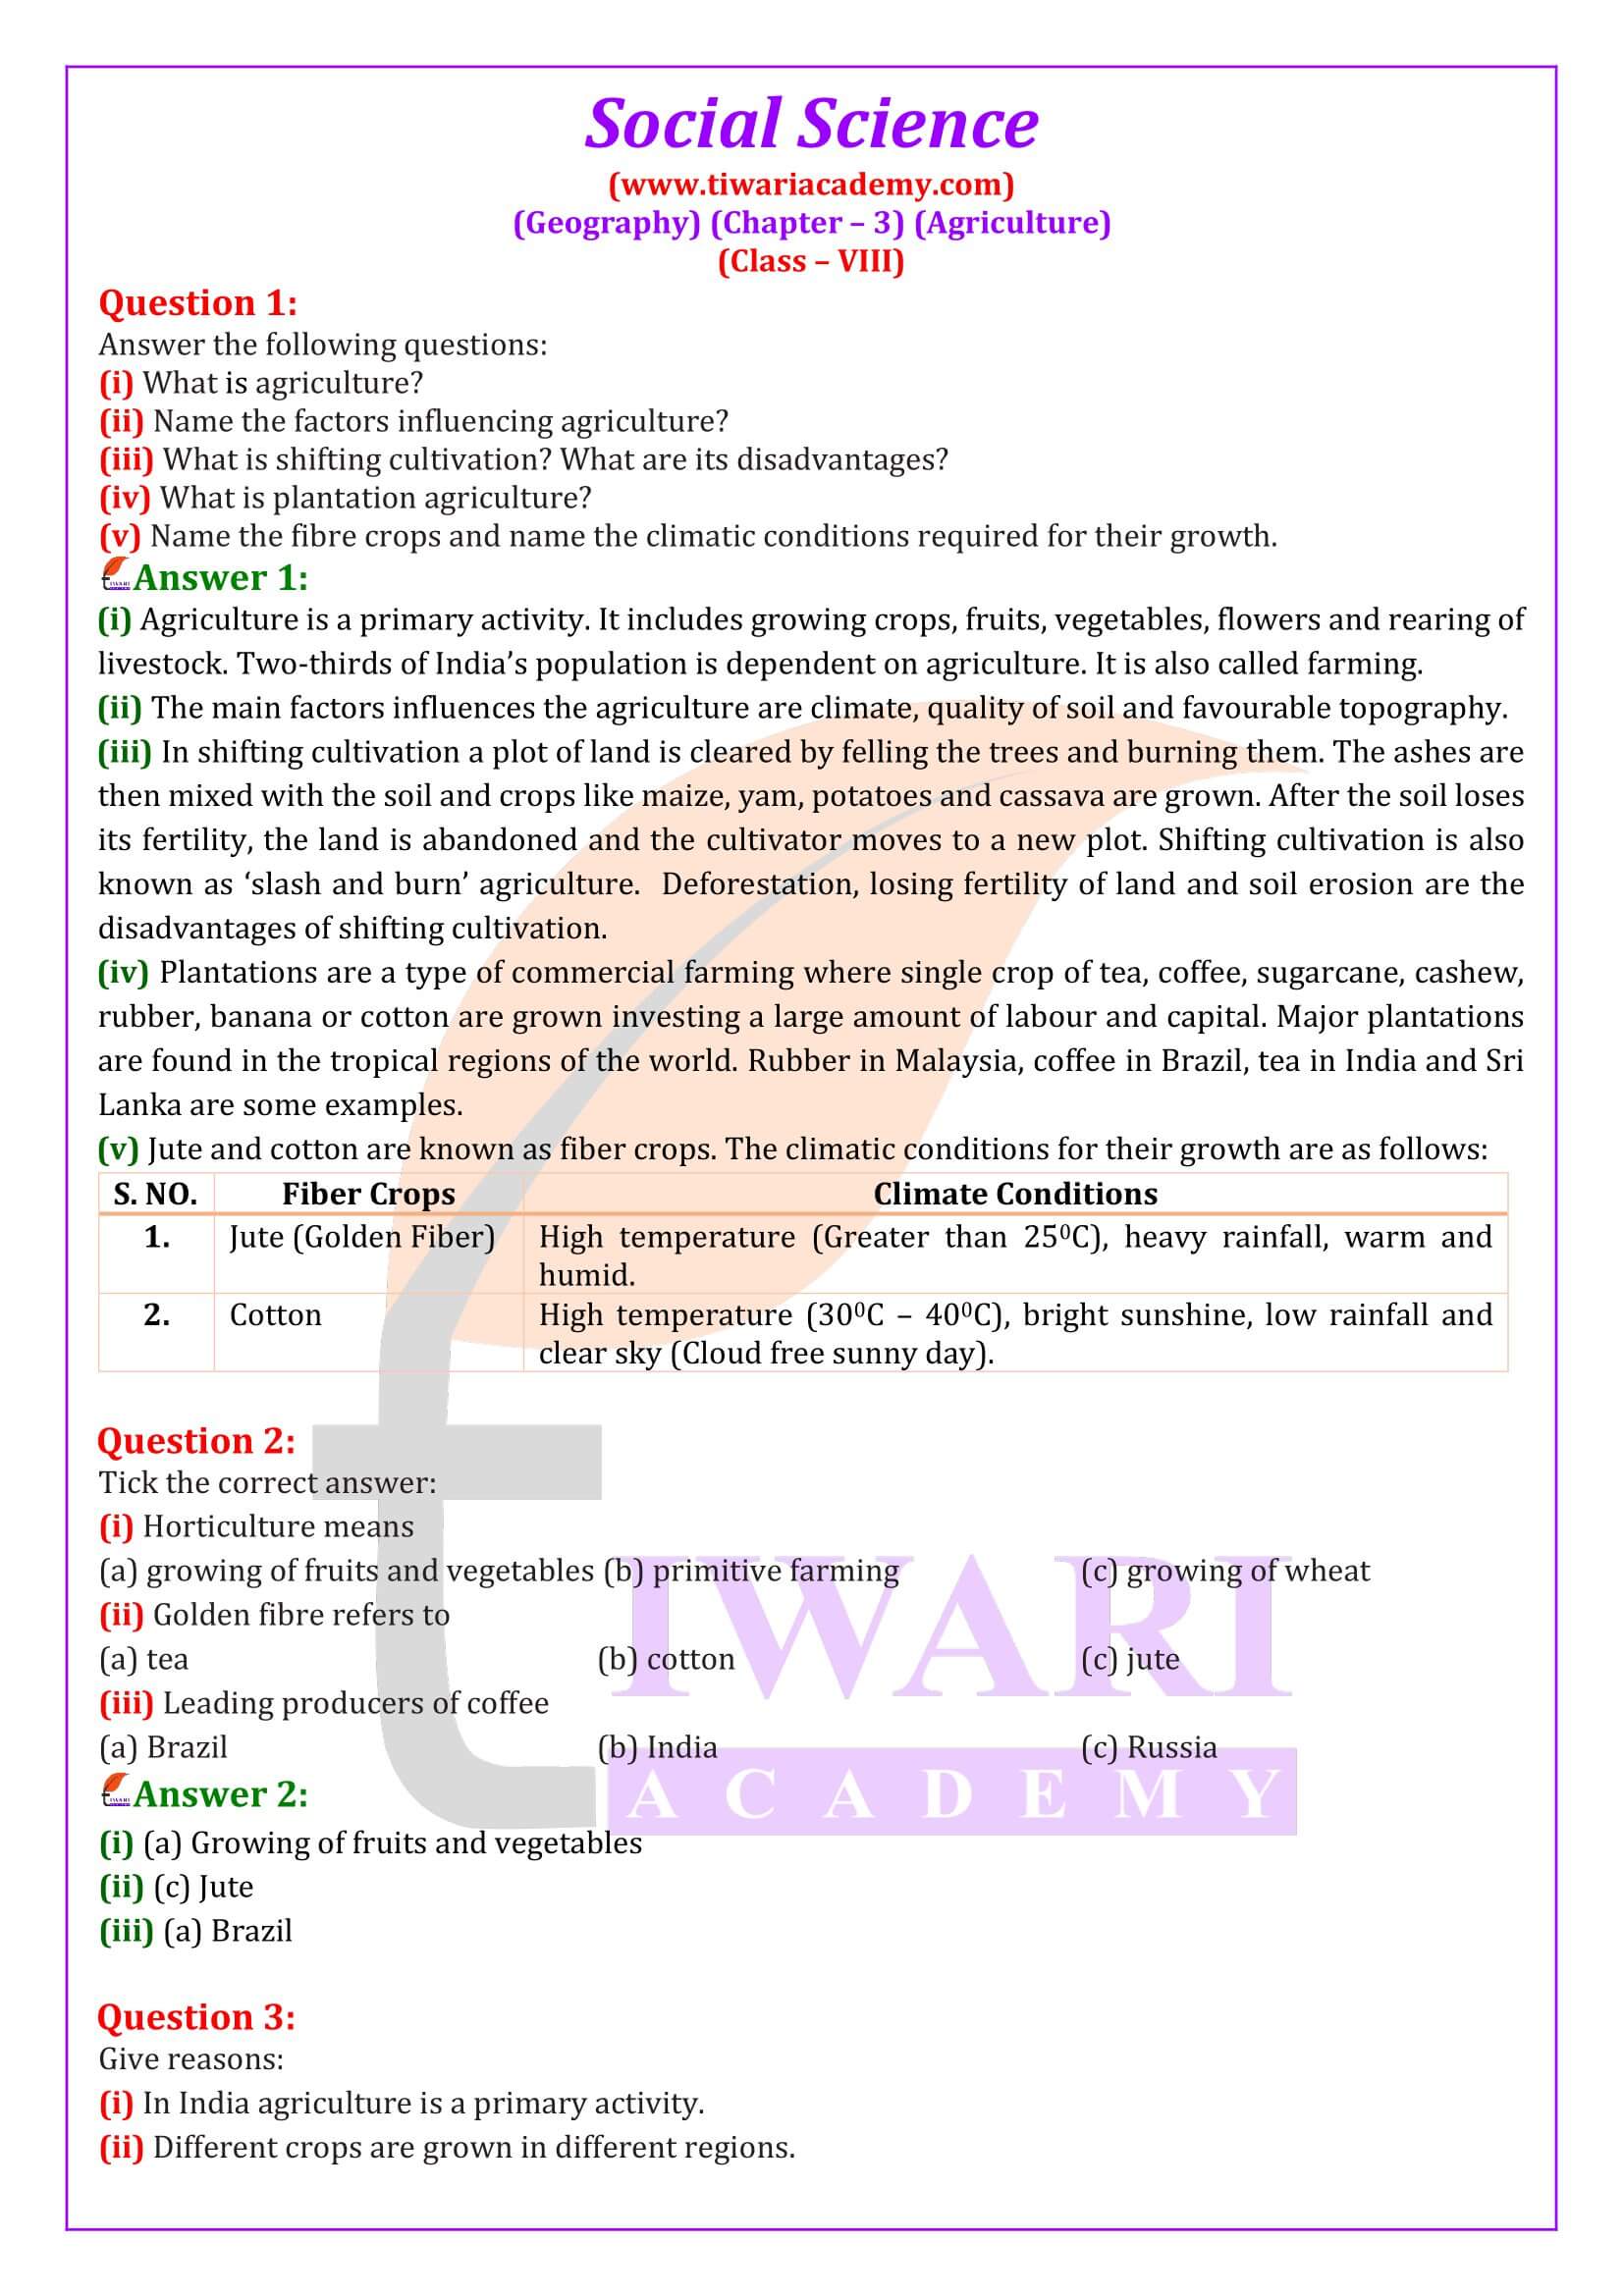 NCERT Solutions for Class 8 Social Science Geography Chapter 3 Agriculture